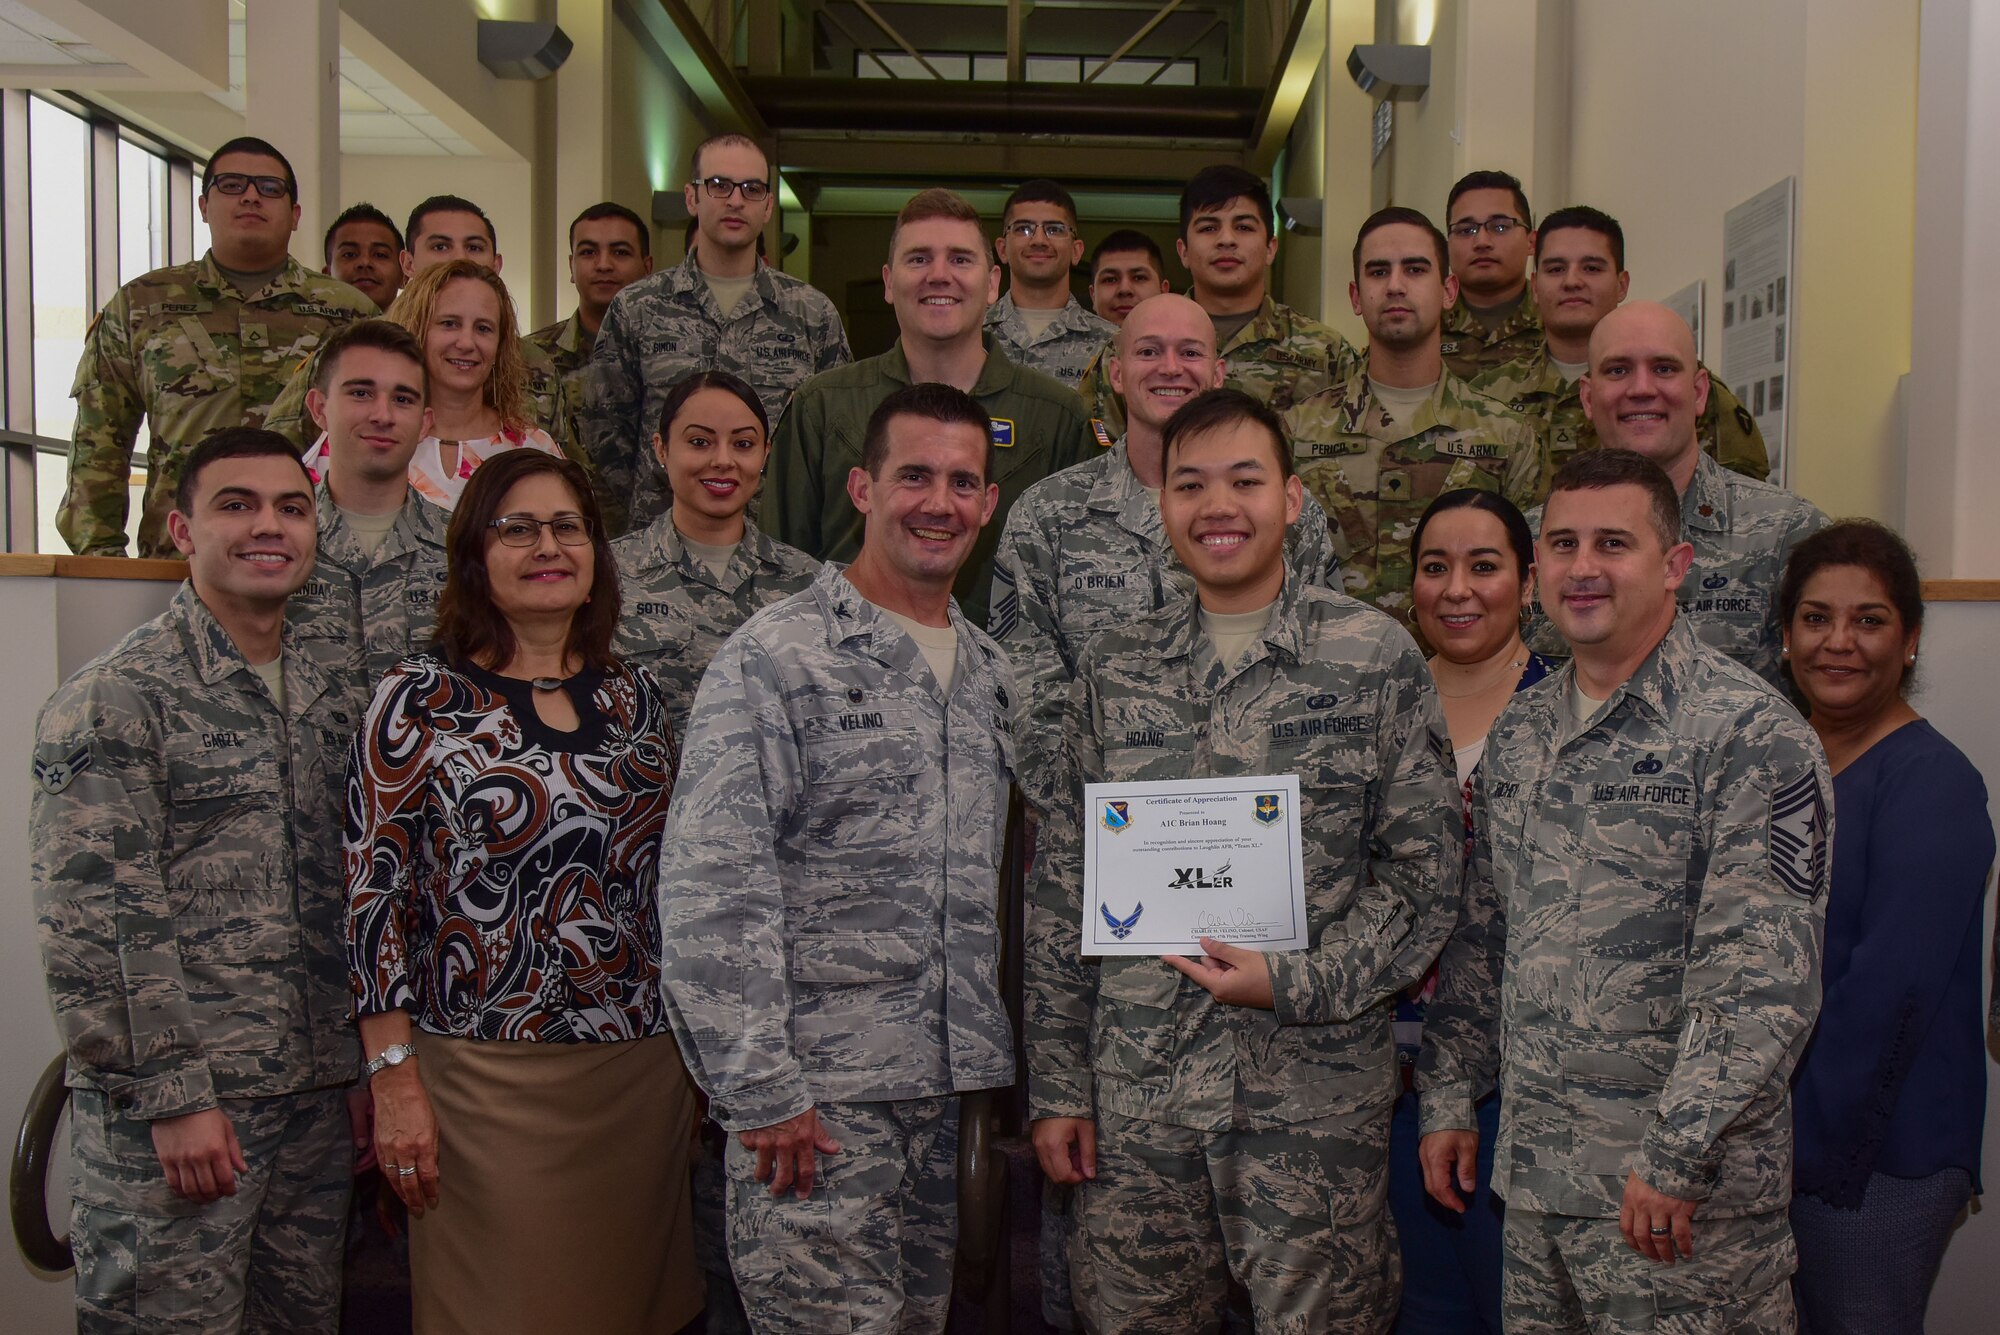 Airman 1st Class Brian Hoang, 47th Comptroller Squadron financial service technician, was chosen by wing leadership to be the “XLer” of the week, for the week of May 21, 2018, at Laughlin Air Force Base, Texas. The “XLer” award, presented by Col. Charlie Velino, 47th Flying Training Wing commander, is given to those who consistently make outstanding contributions to their unit and the Laughlin mission. (U.S. Air Force photo by Airman 1st Class Marco A. Gomez)